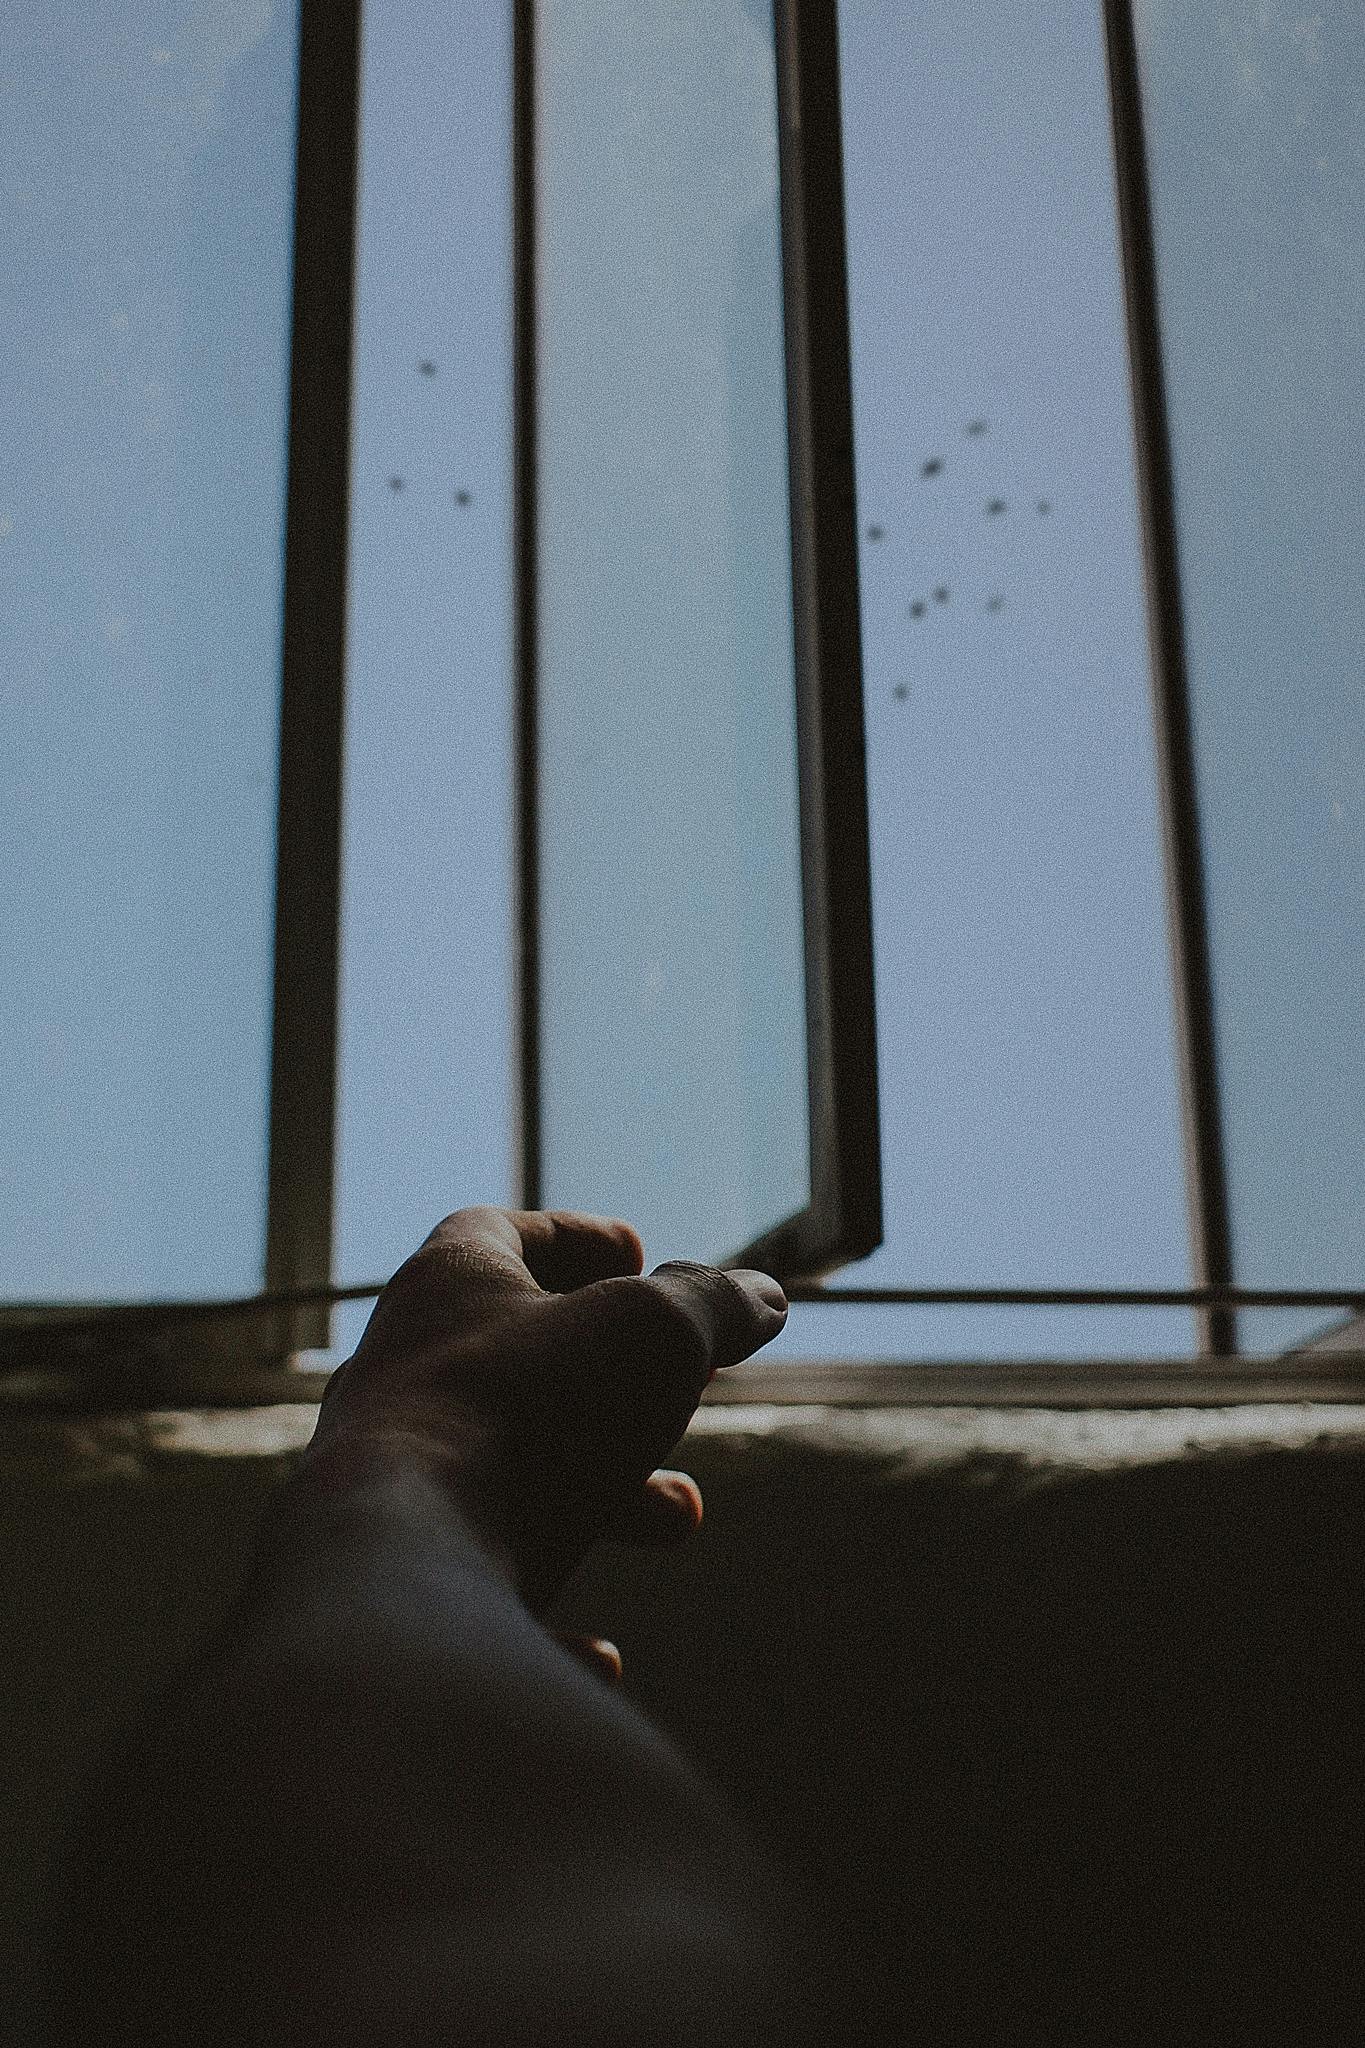 a person holding a cell phone in front of a window, an album cover, pexels contest winner, visual art, looking up onto the sky, scratches on photo, empty hands, bars on the windows